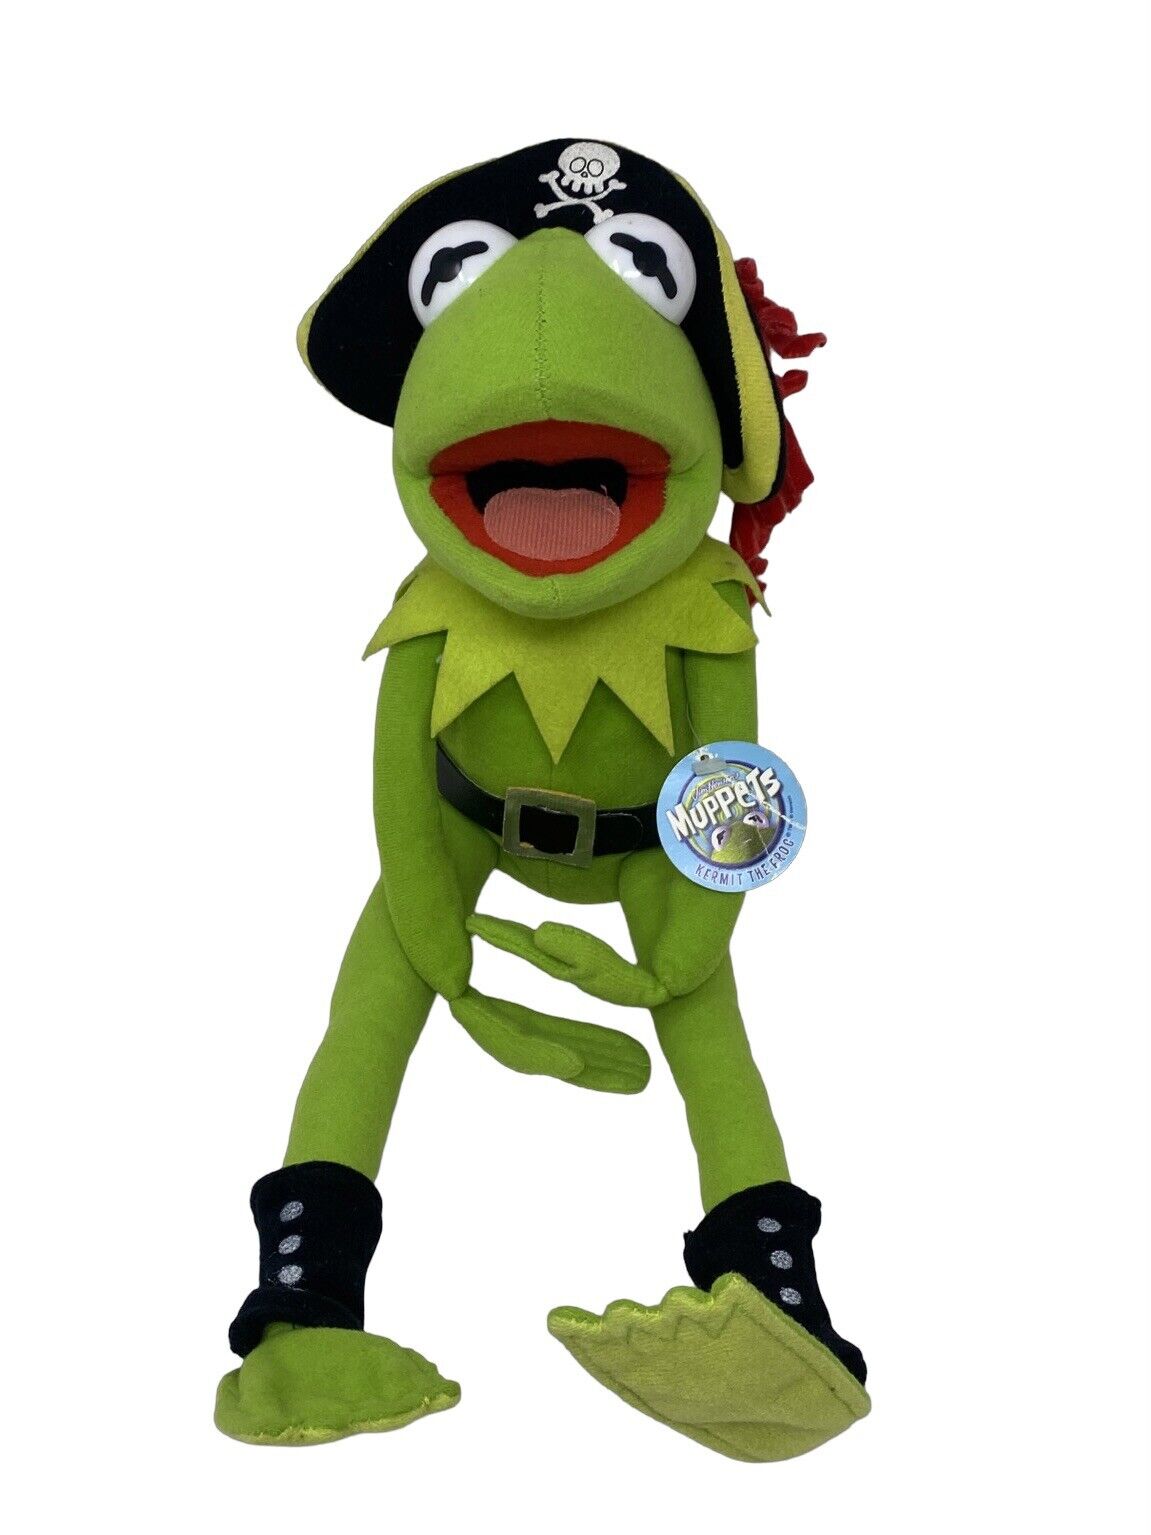 Nanco Vintage The Muppets Kermit The Frog Pirate Costume Posable Plush 10